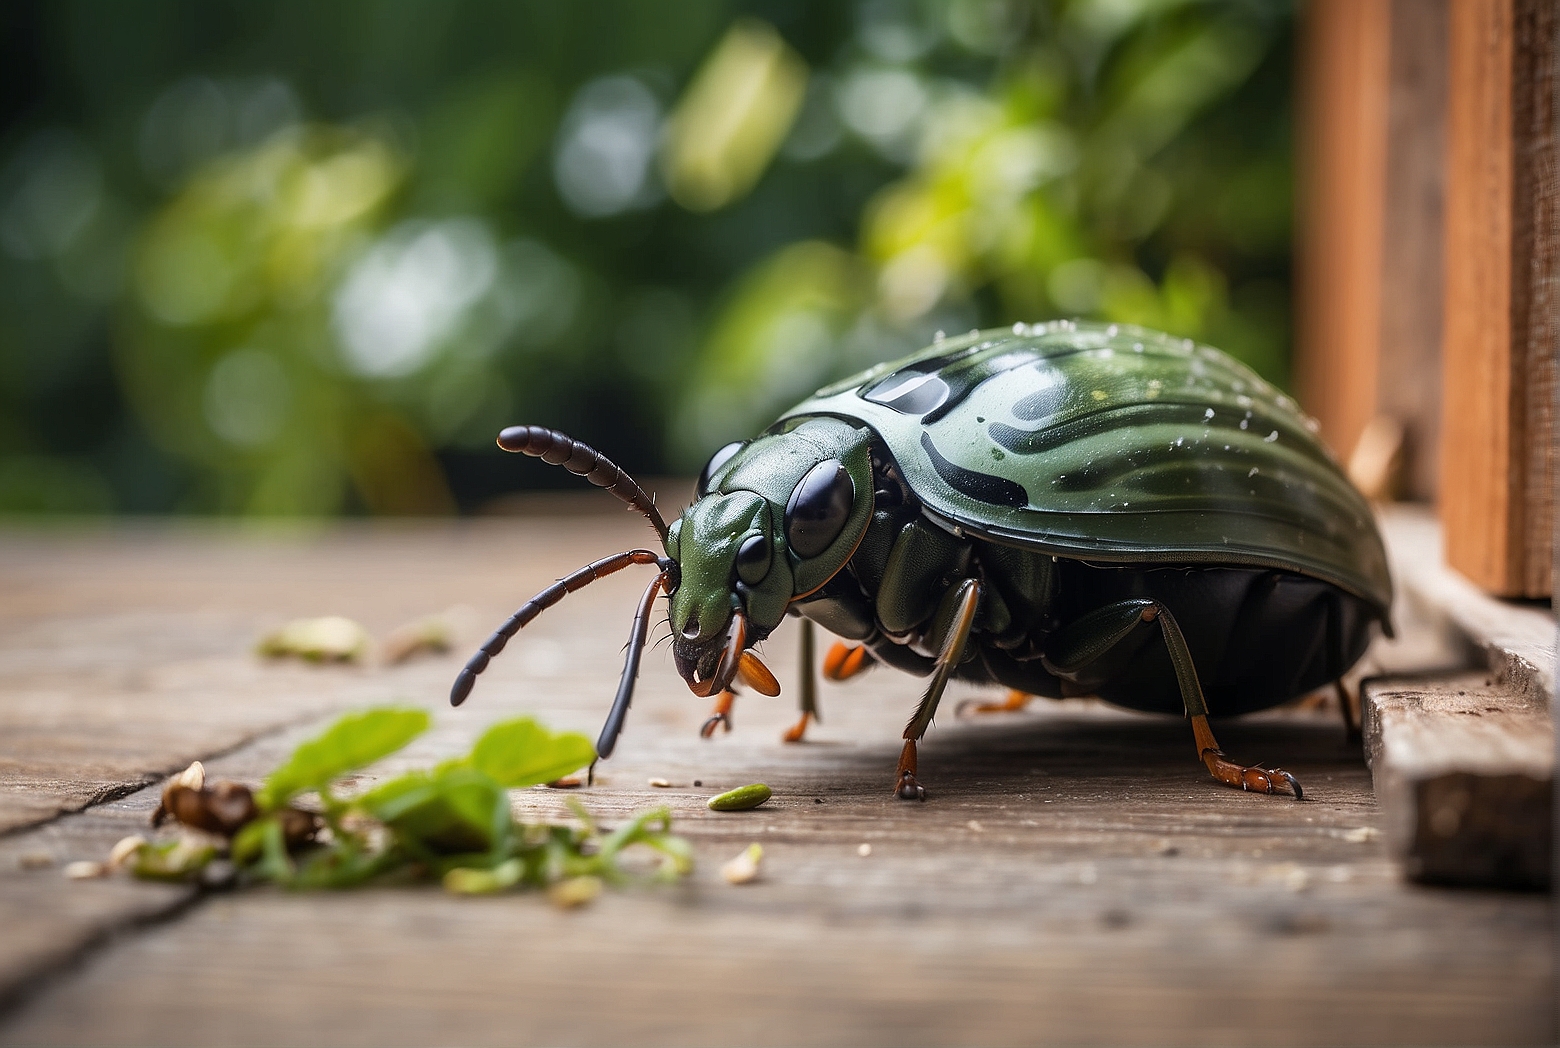 Comparing 5 Effective Pest Control Products